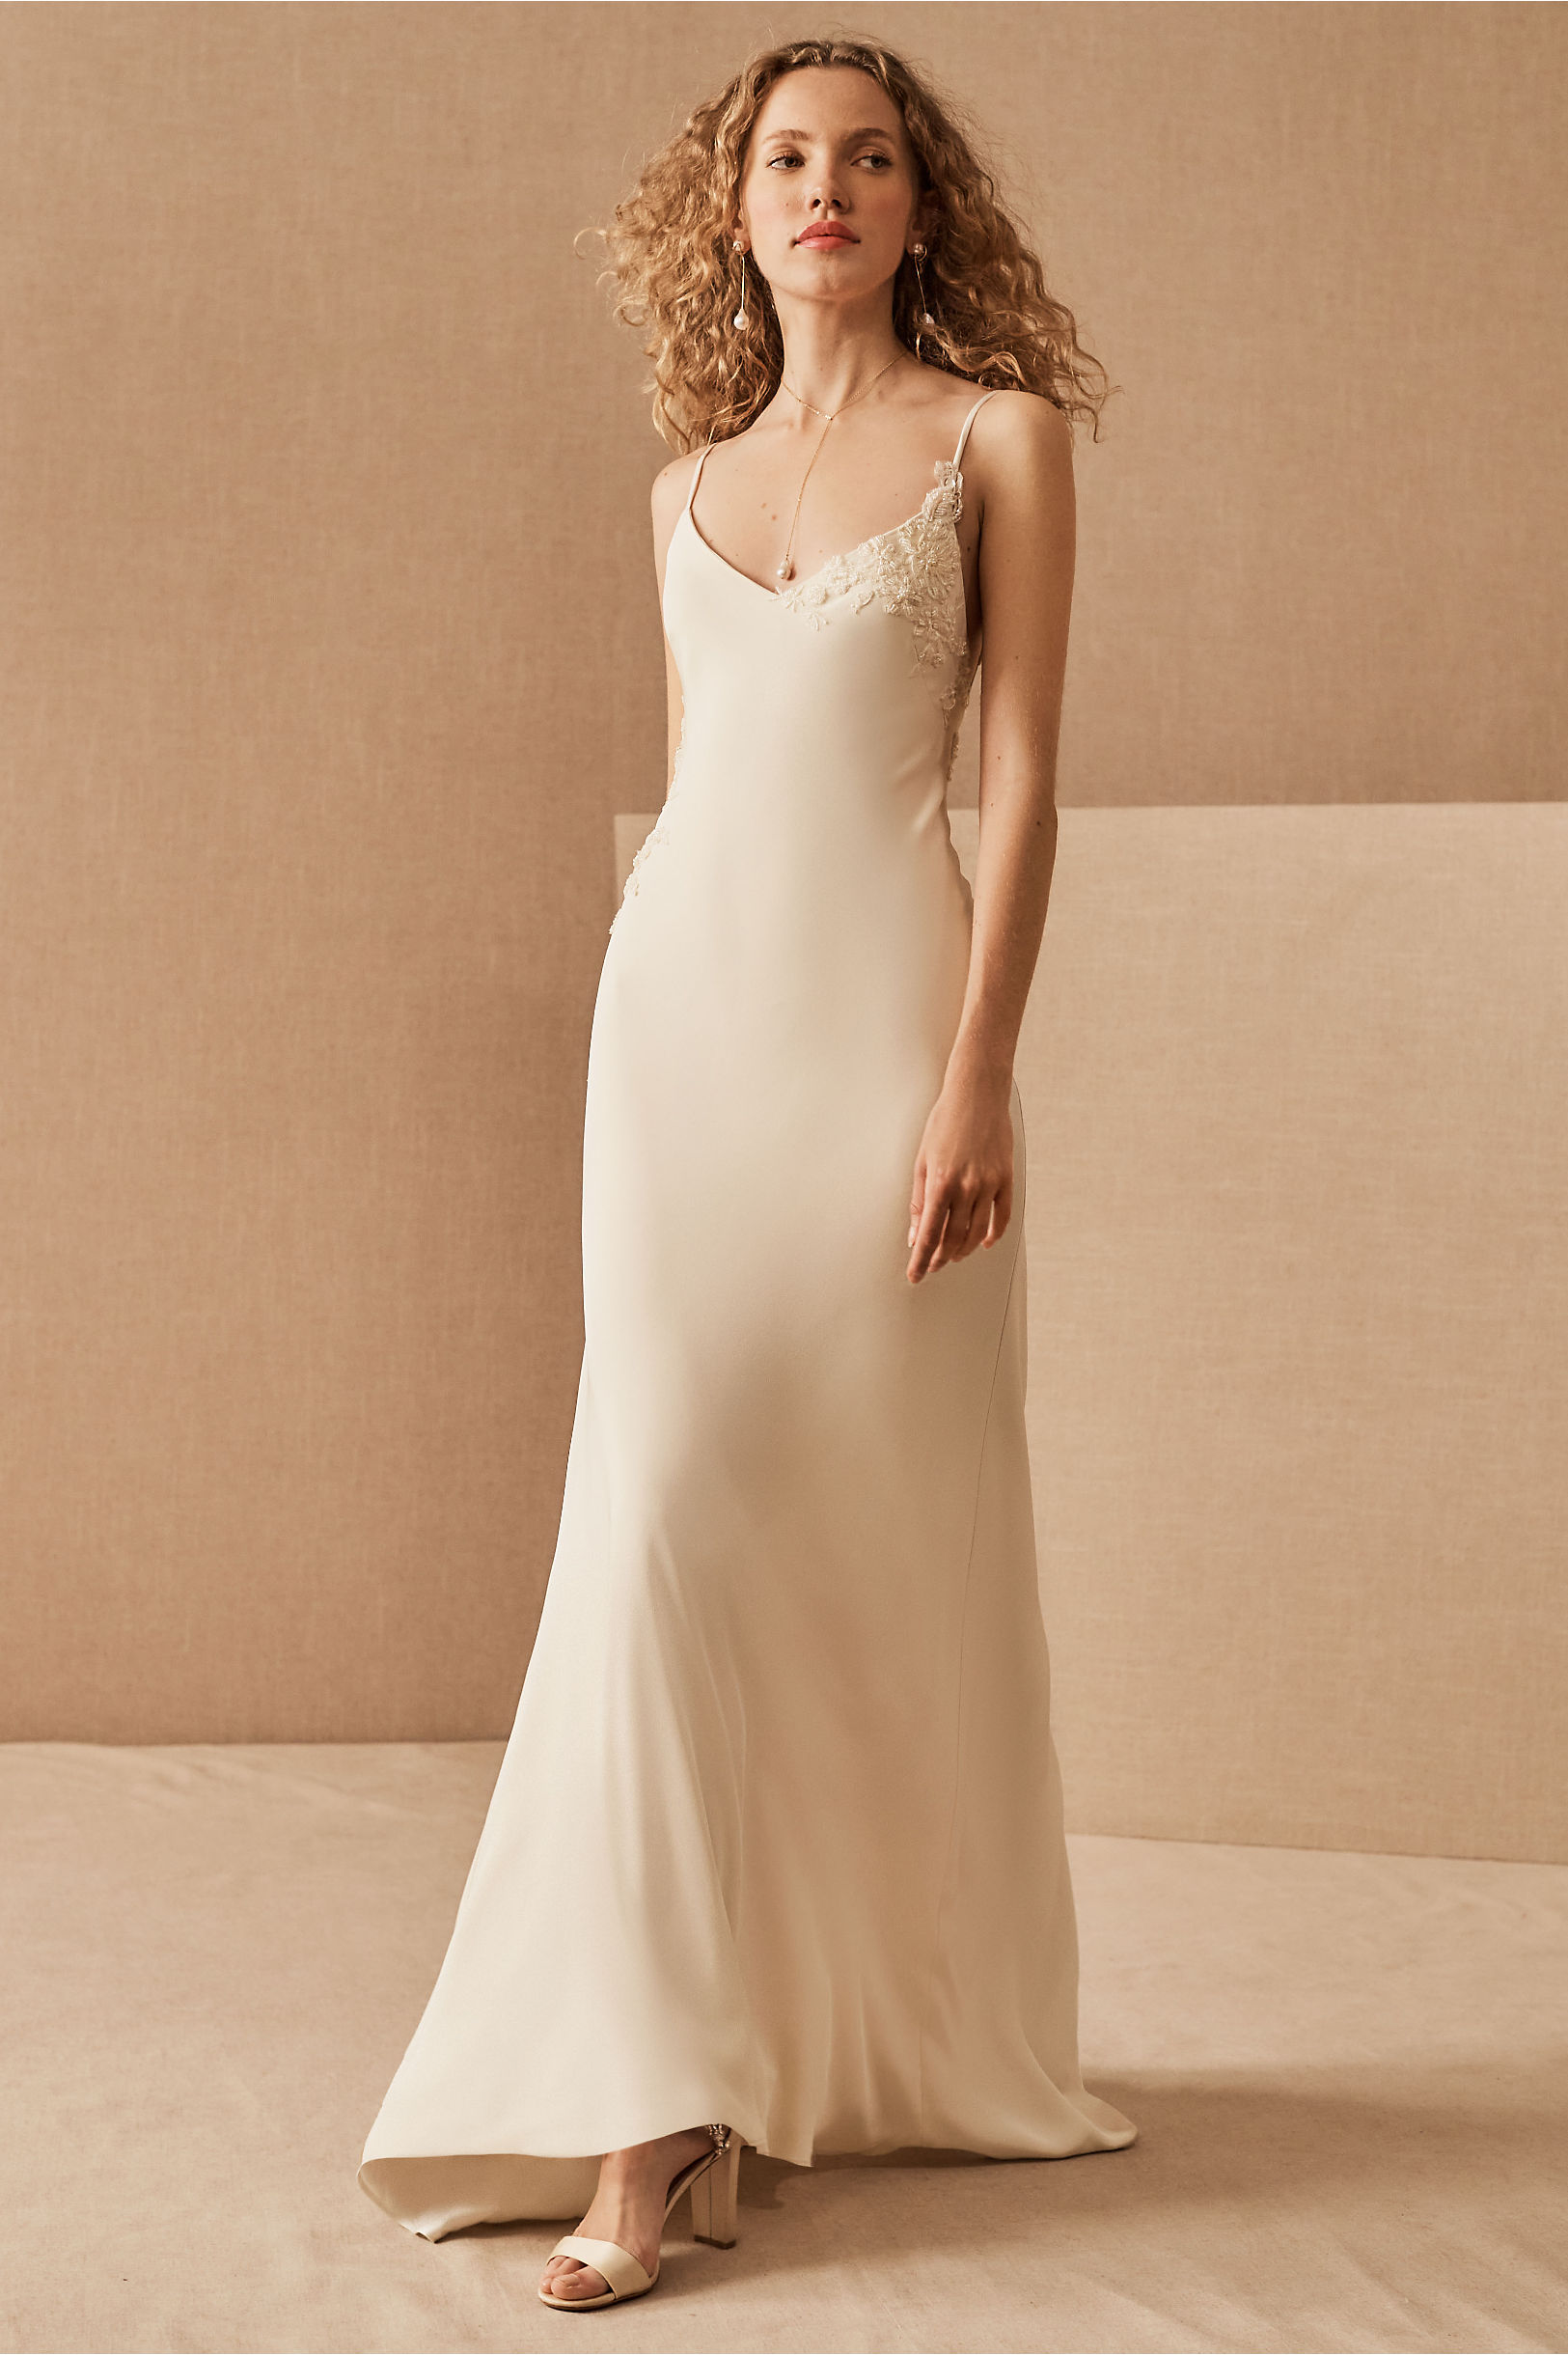 Jenny Yoo Collection Celeste Gown $1,650.00